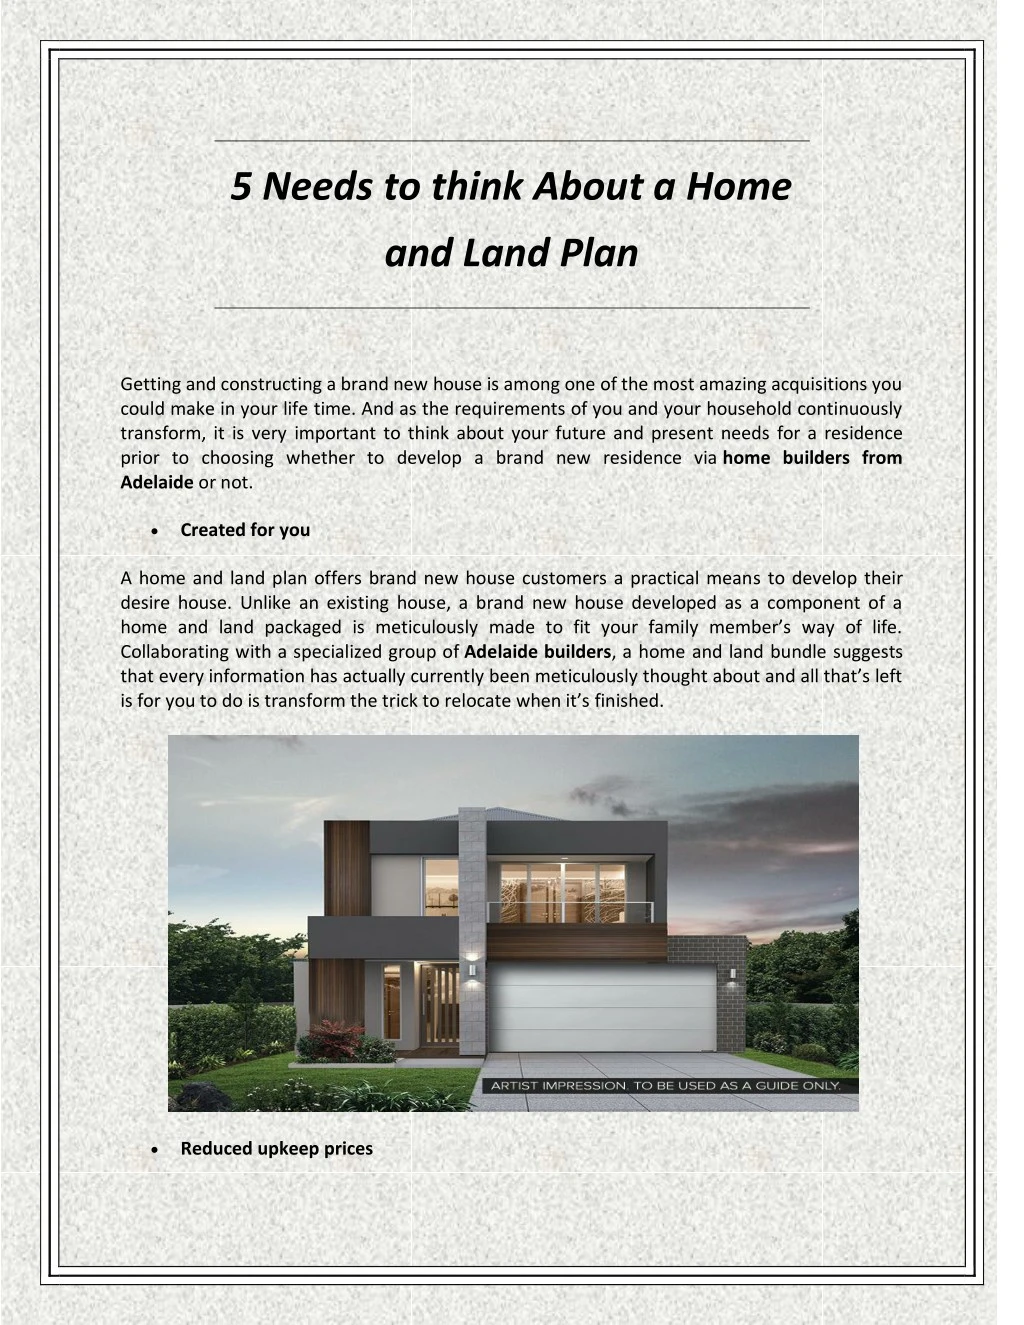 5 needs to think about a home